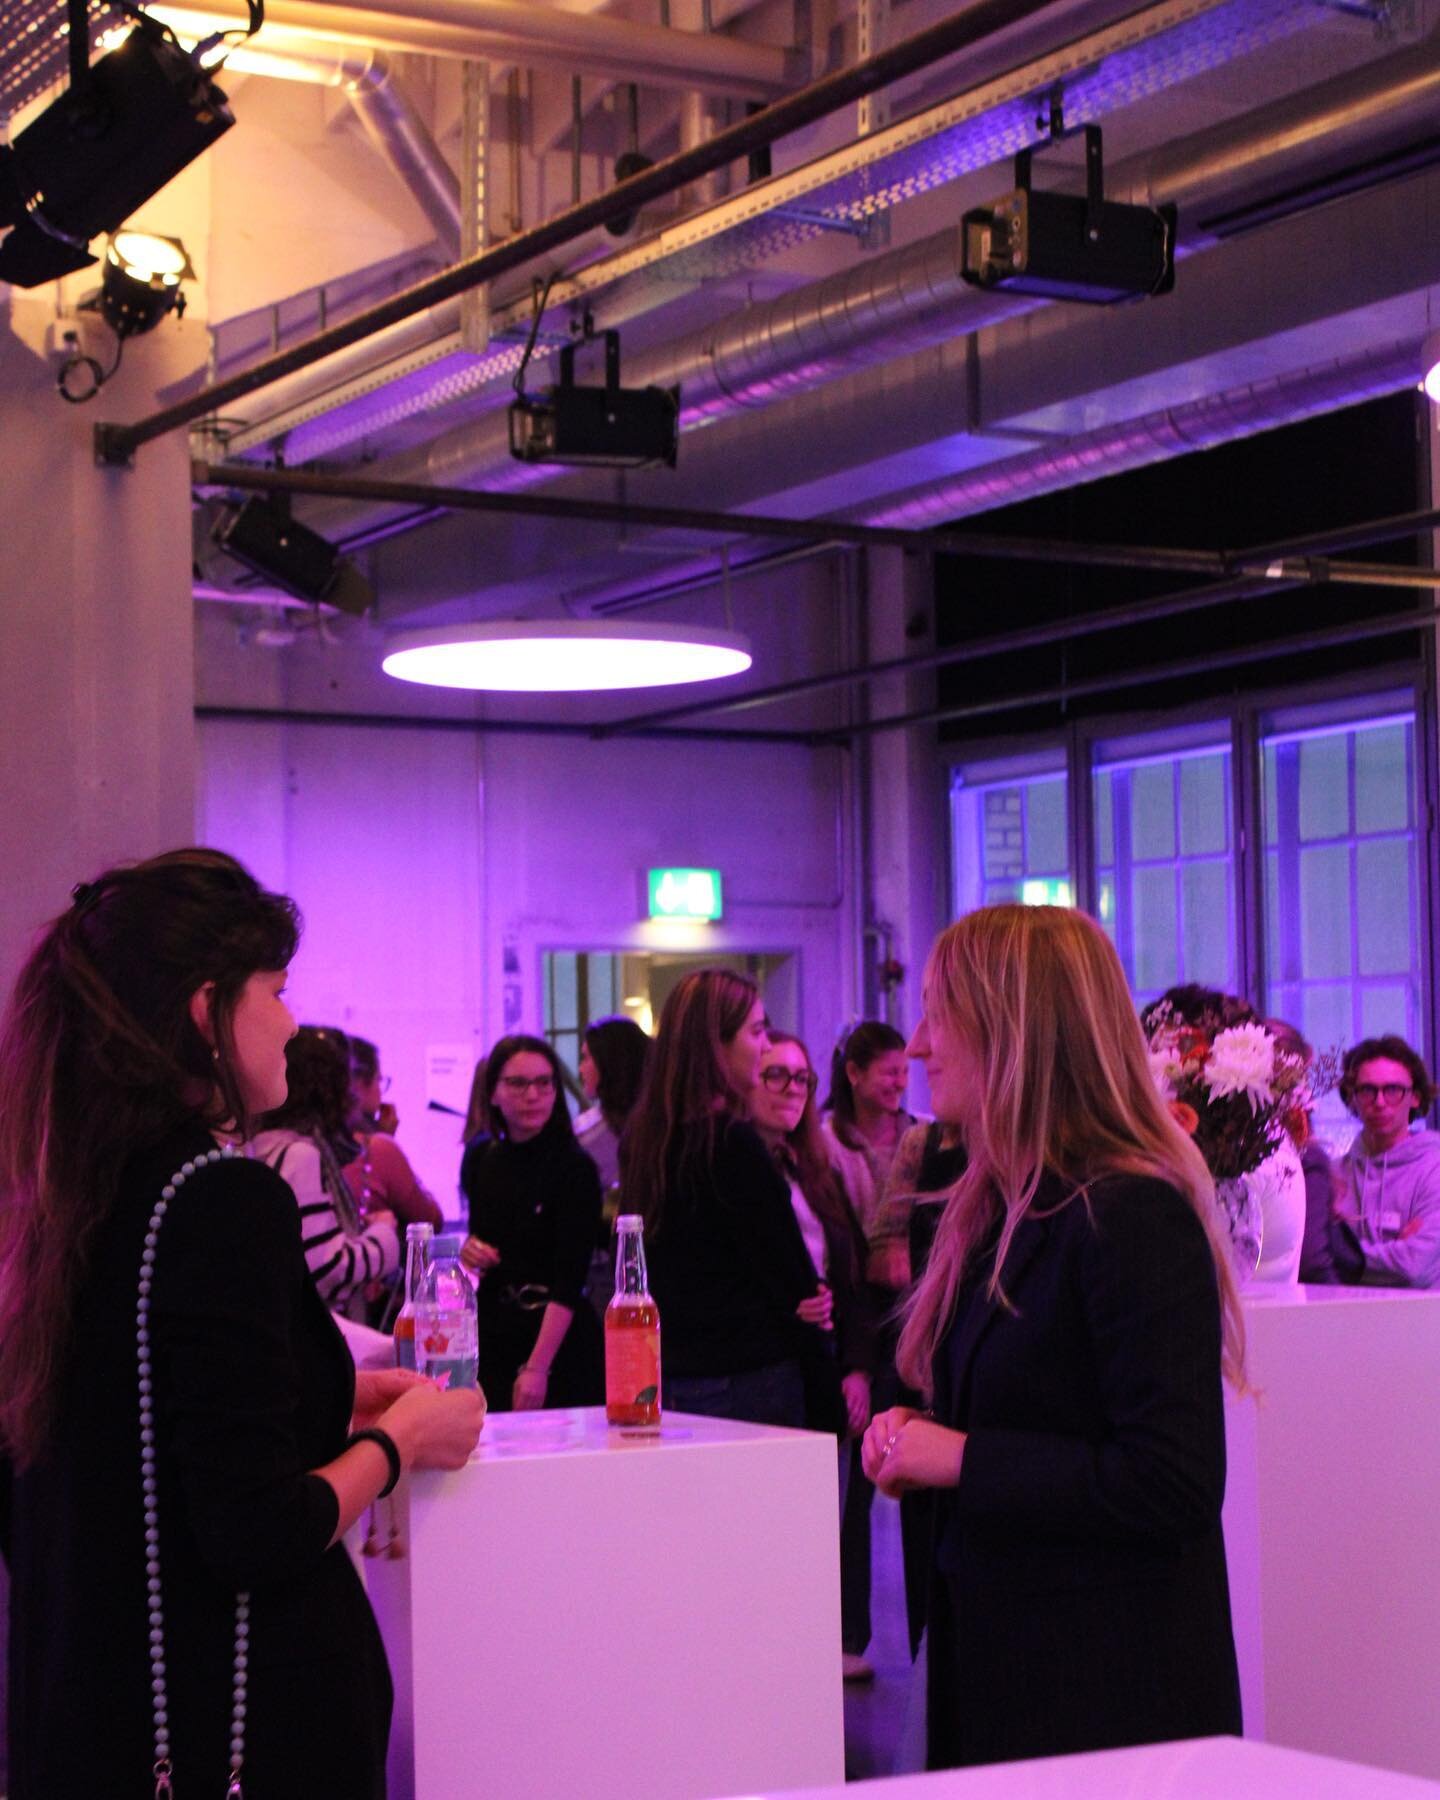 Some more impressions from our femella x START collab last week! 

It was so great to see you all there and GROW in our knowledge and network together! 💗

Another big thank you to our generous sponsors:
Ap&eacute;ro by @confiseriehonold 
Wine by @ca